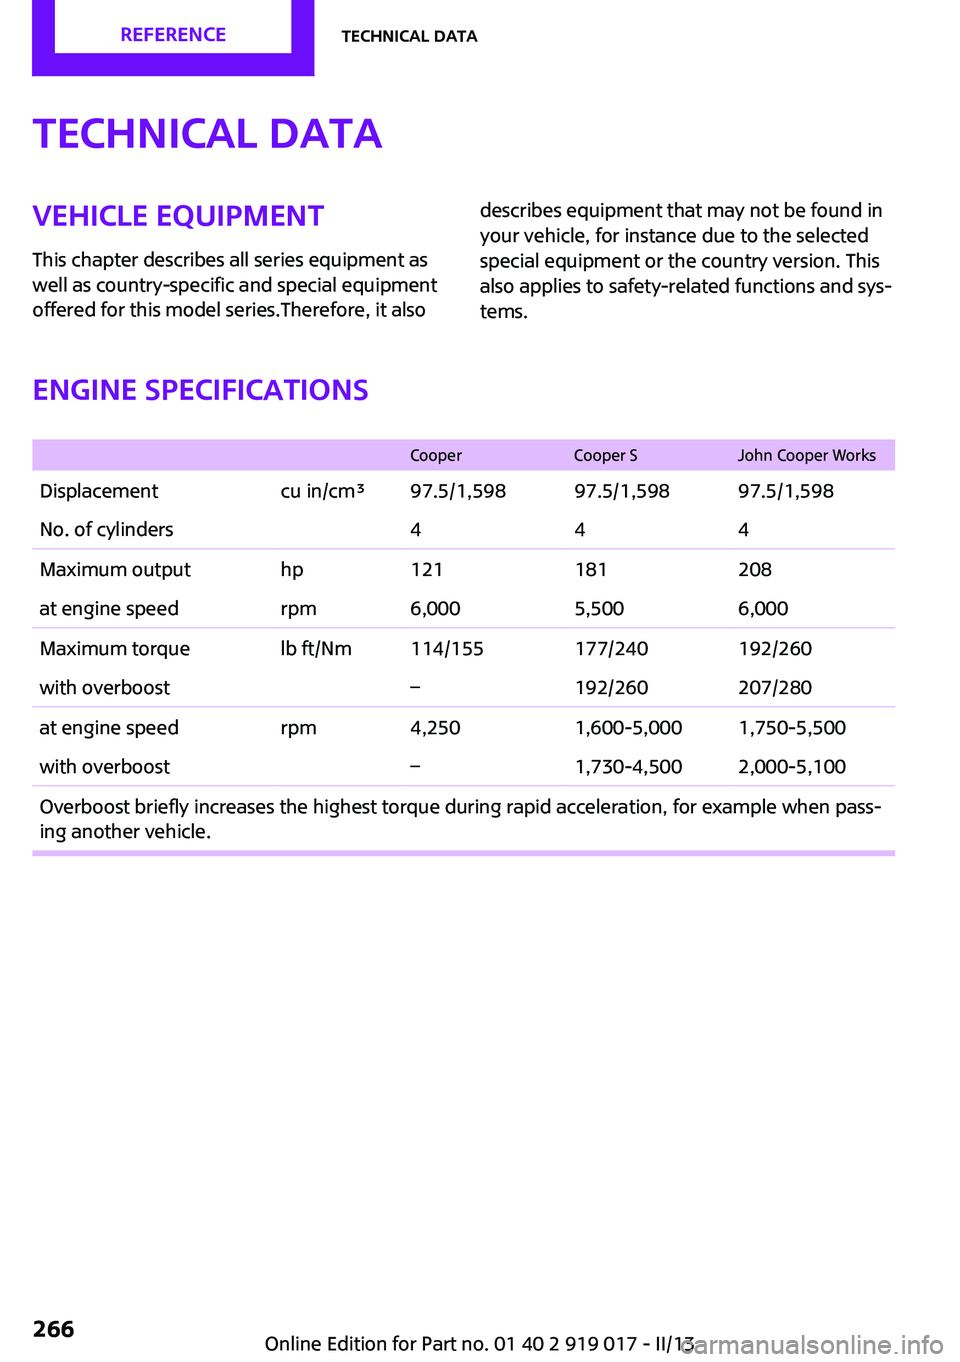 MINI COOPER CONVERTIBLE 2013  Owners Manual Technical dataVehicle equipment
This chapter describes all series equipment as
well as country-specific and special equipment
offered for this model series.Therefore, it alsodescribes equipment that m